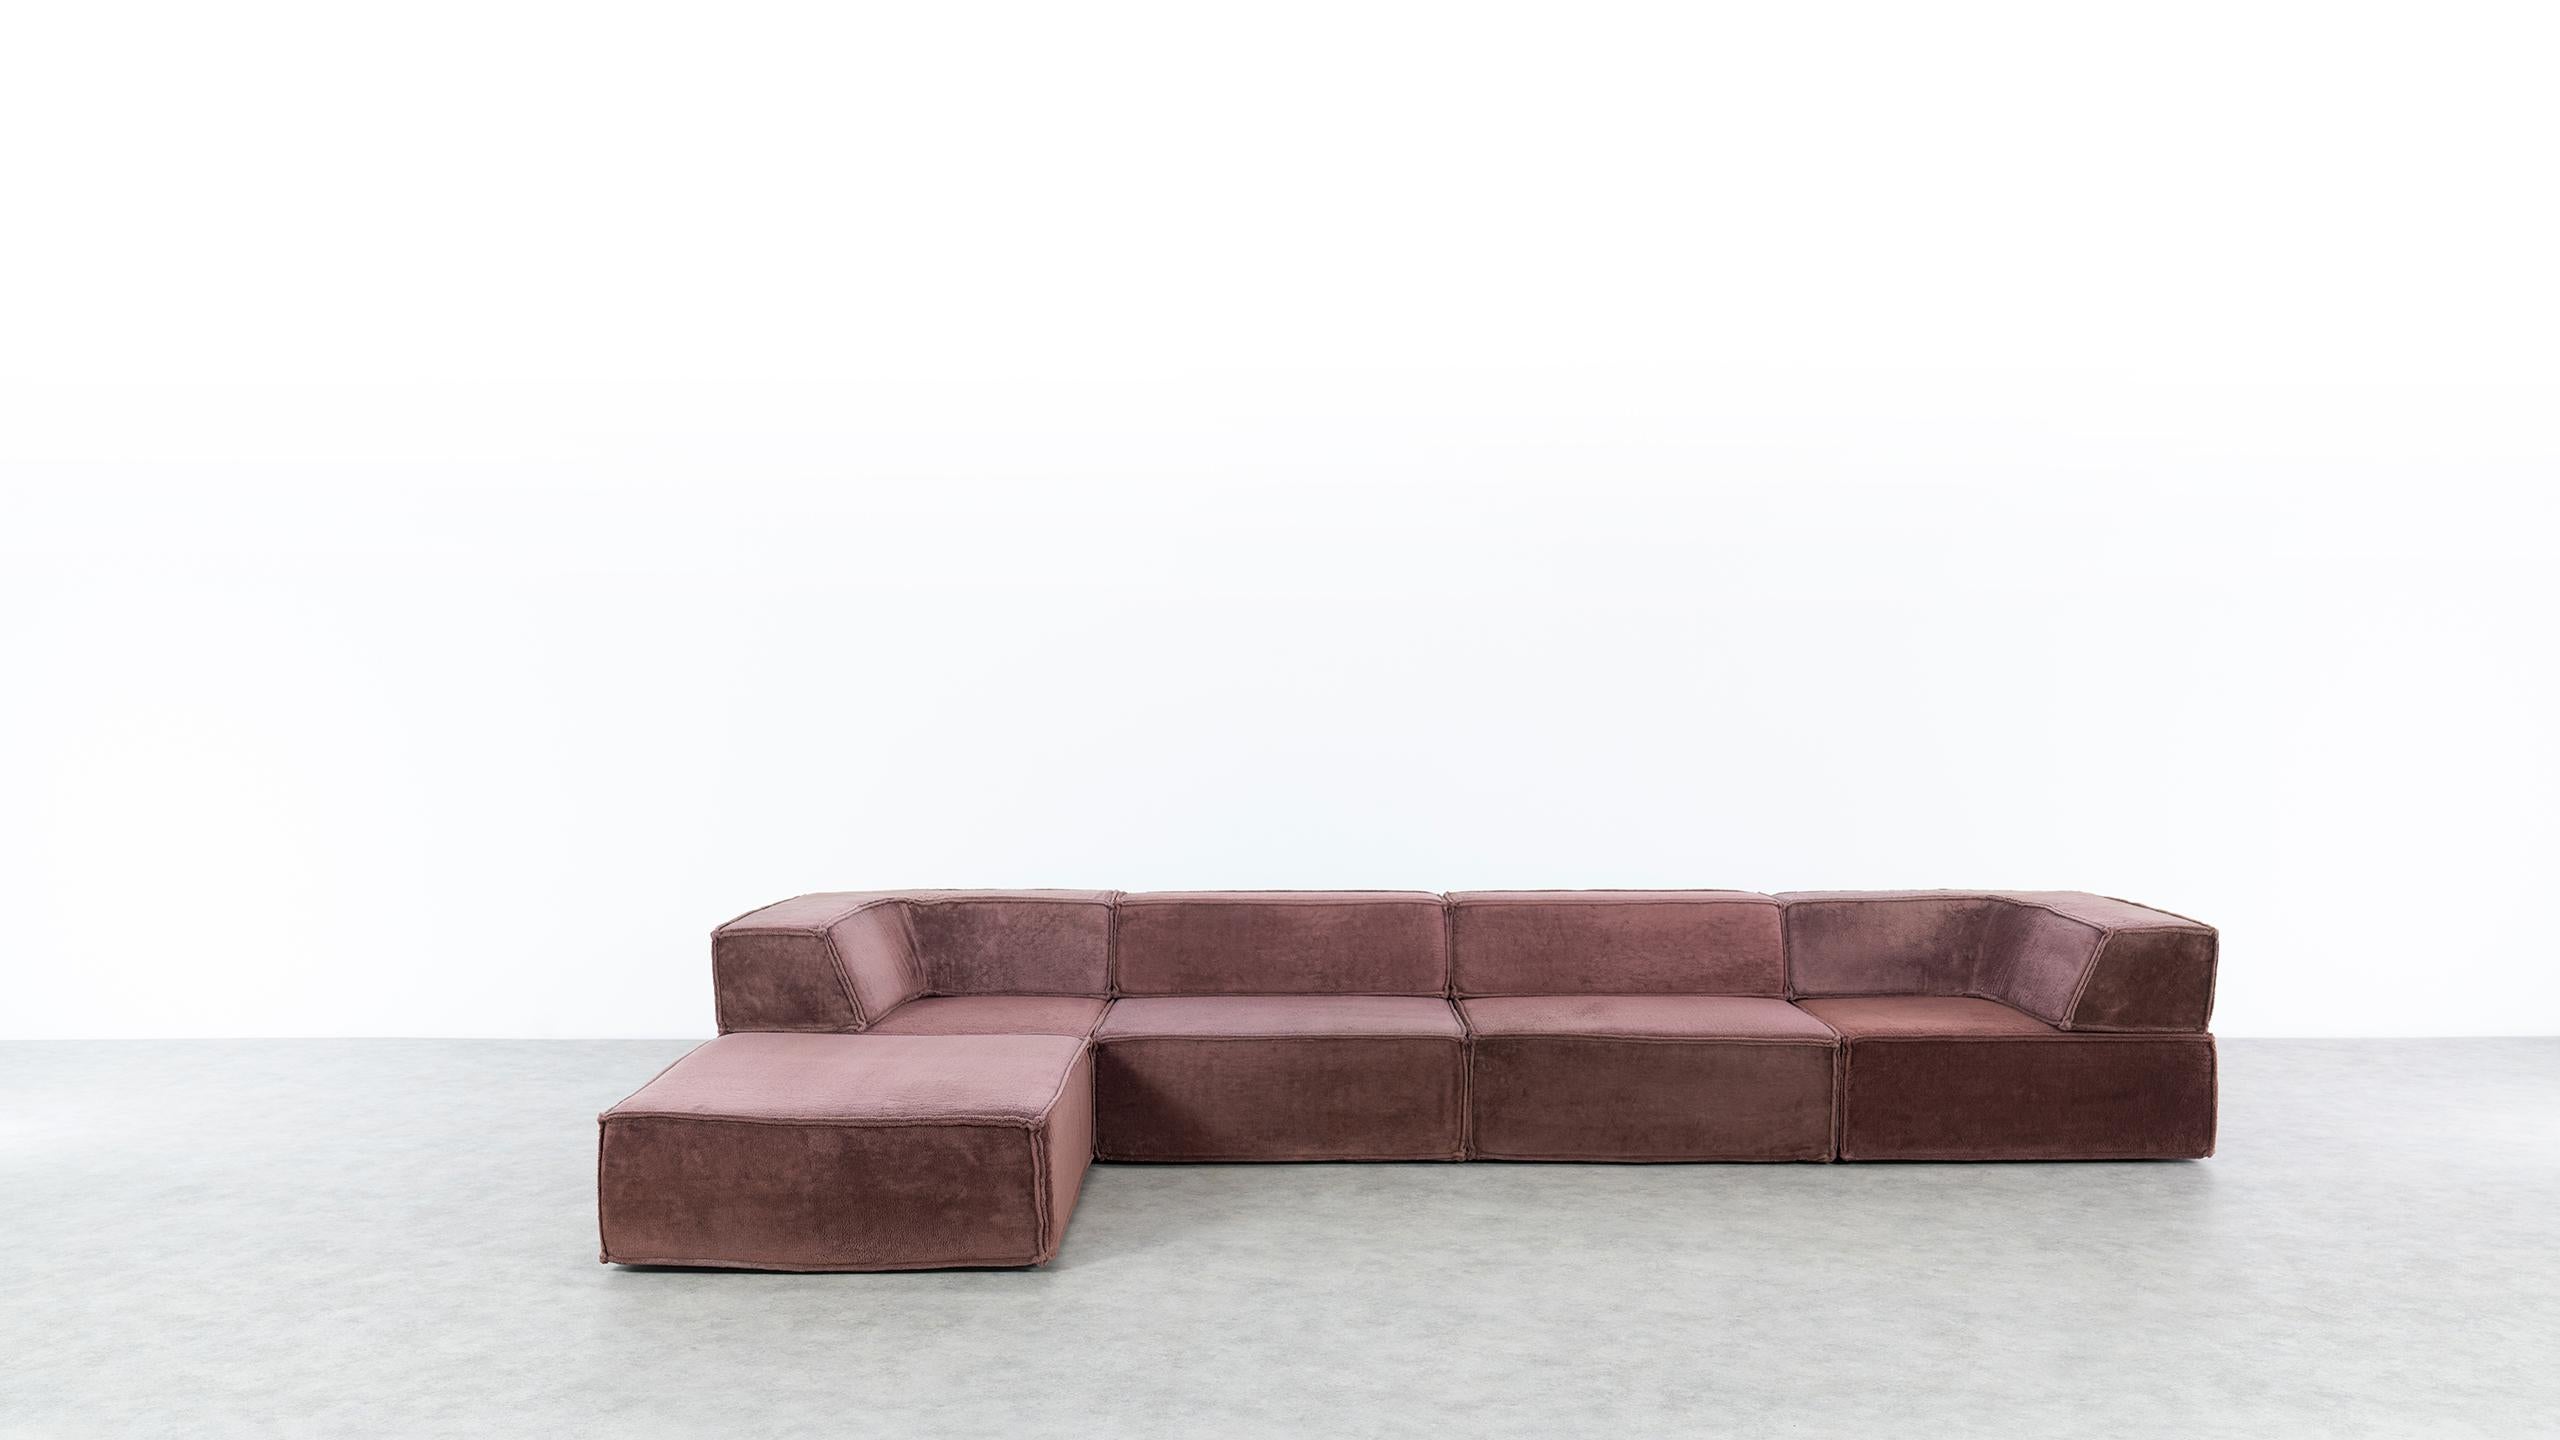 Hand-Crafted COR Trio Modular Sofa, Giant Landscape in Brown, 1972 by Team Form AG, Swiss